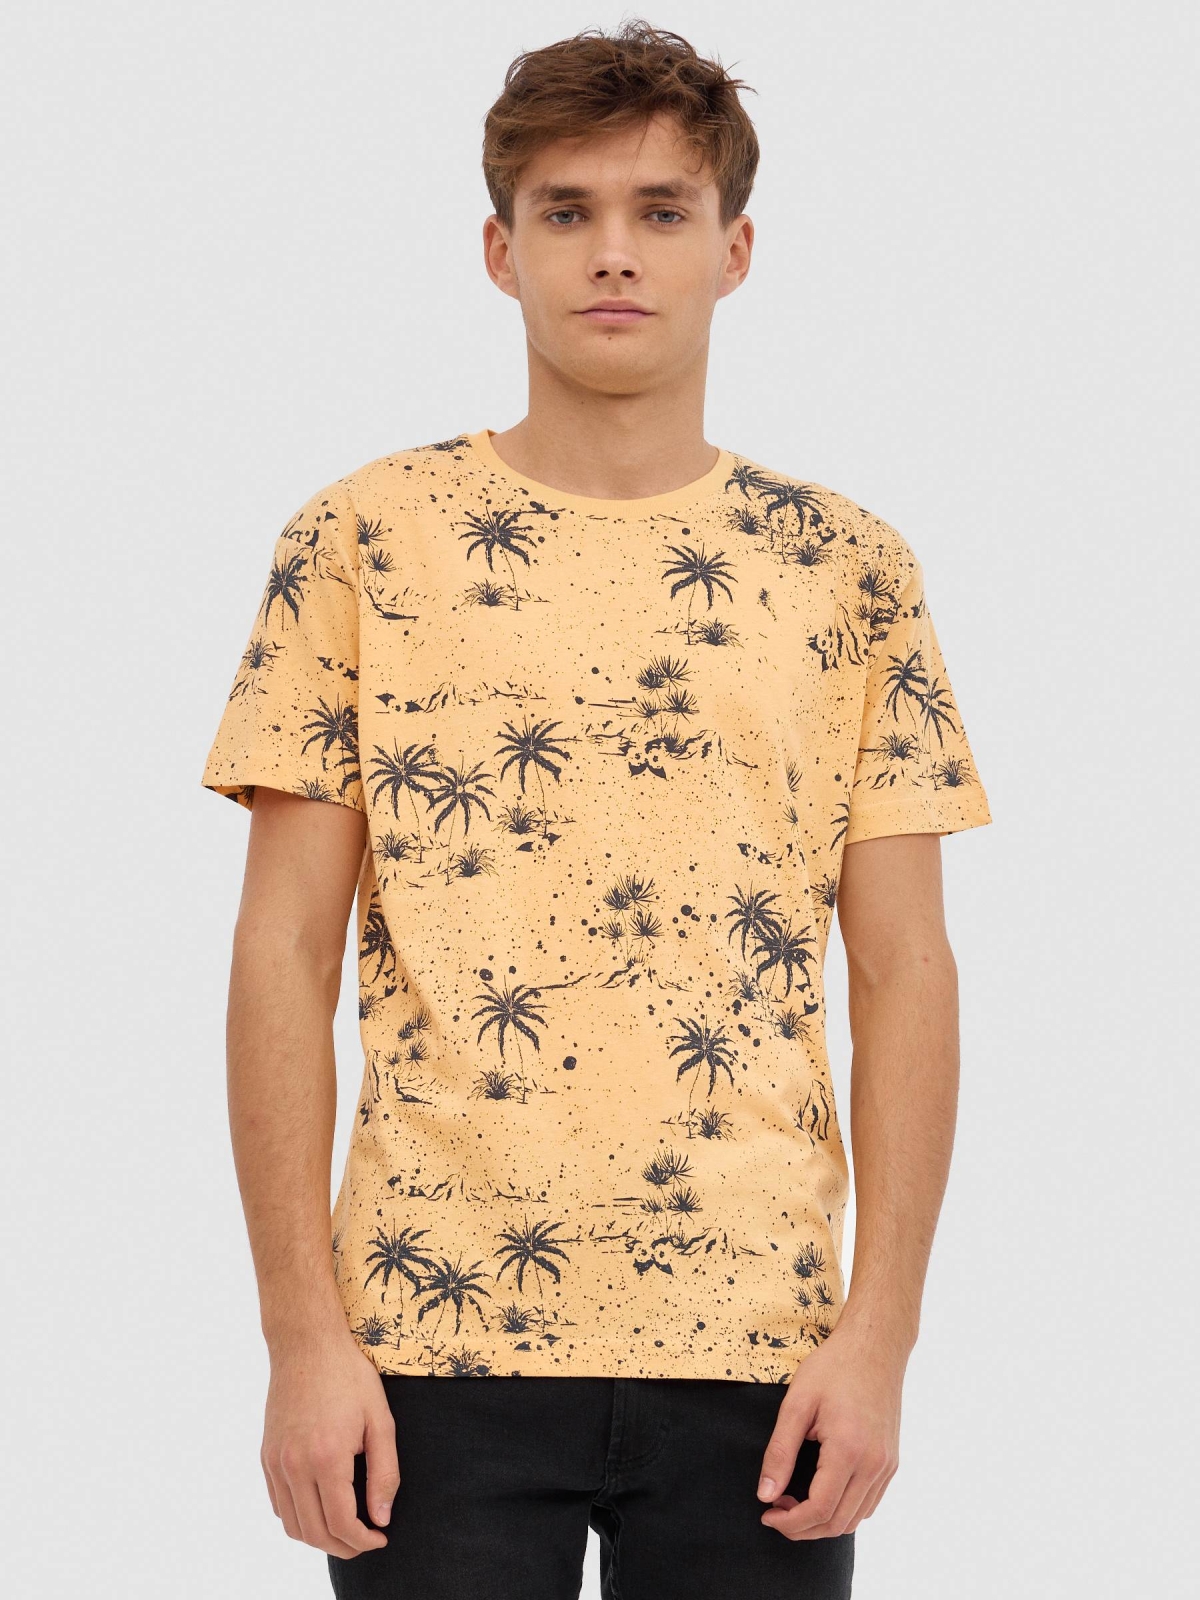 Palms T-shirt yellow middle front view